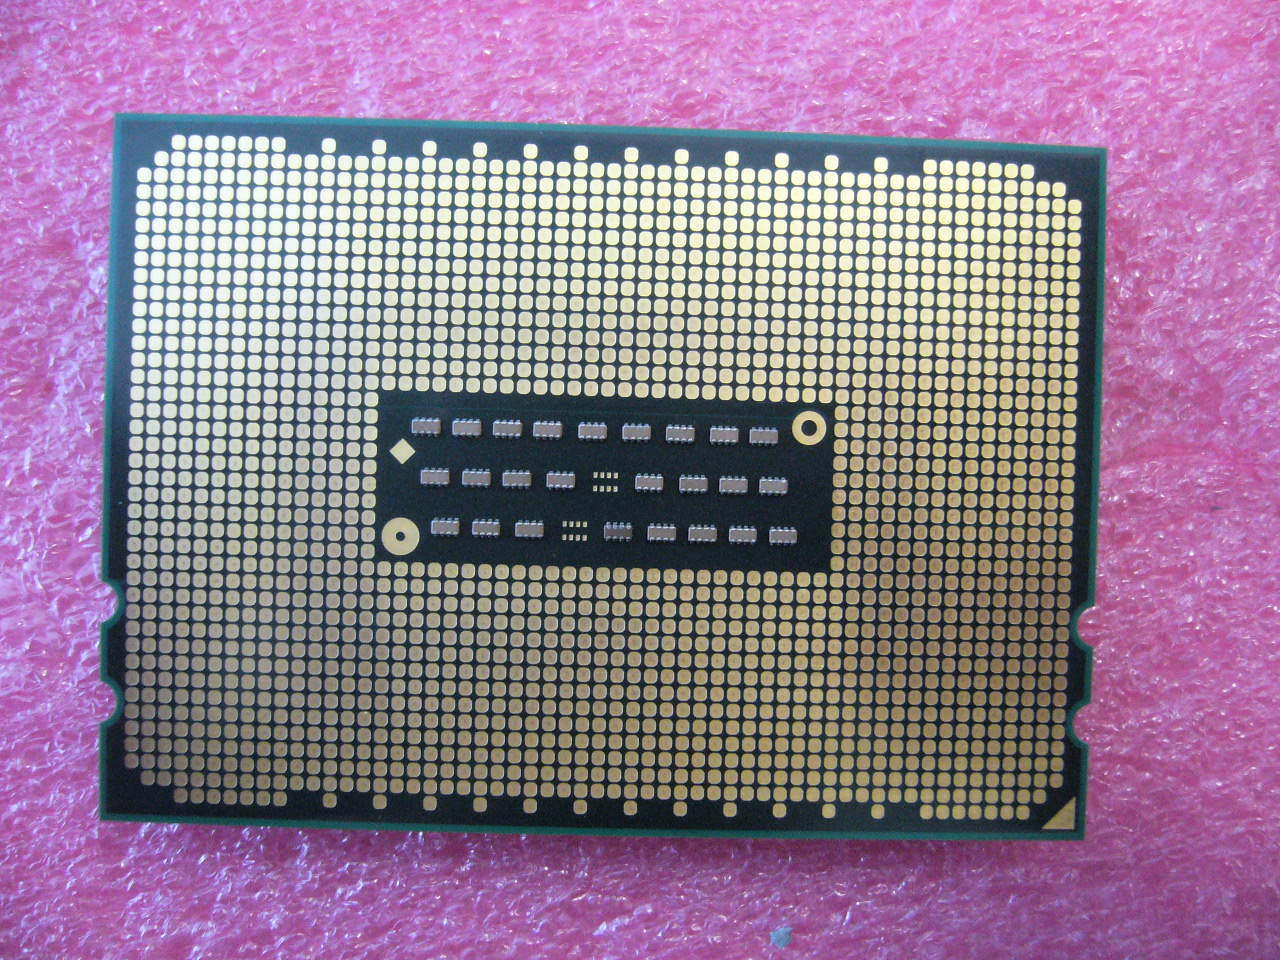 QTY 1x AMD Opteron 6320 2.8GHz Eight Core (OS6320WKT8GHK) CPU Tested G34 - Click Image to Close